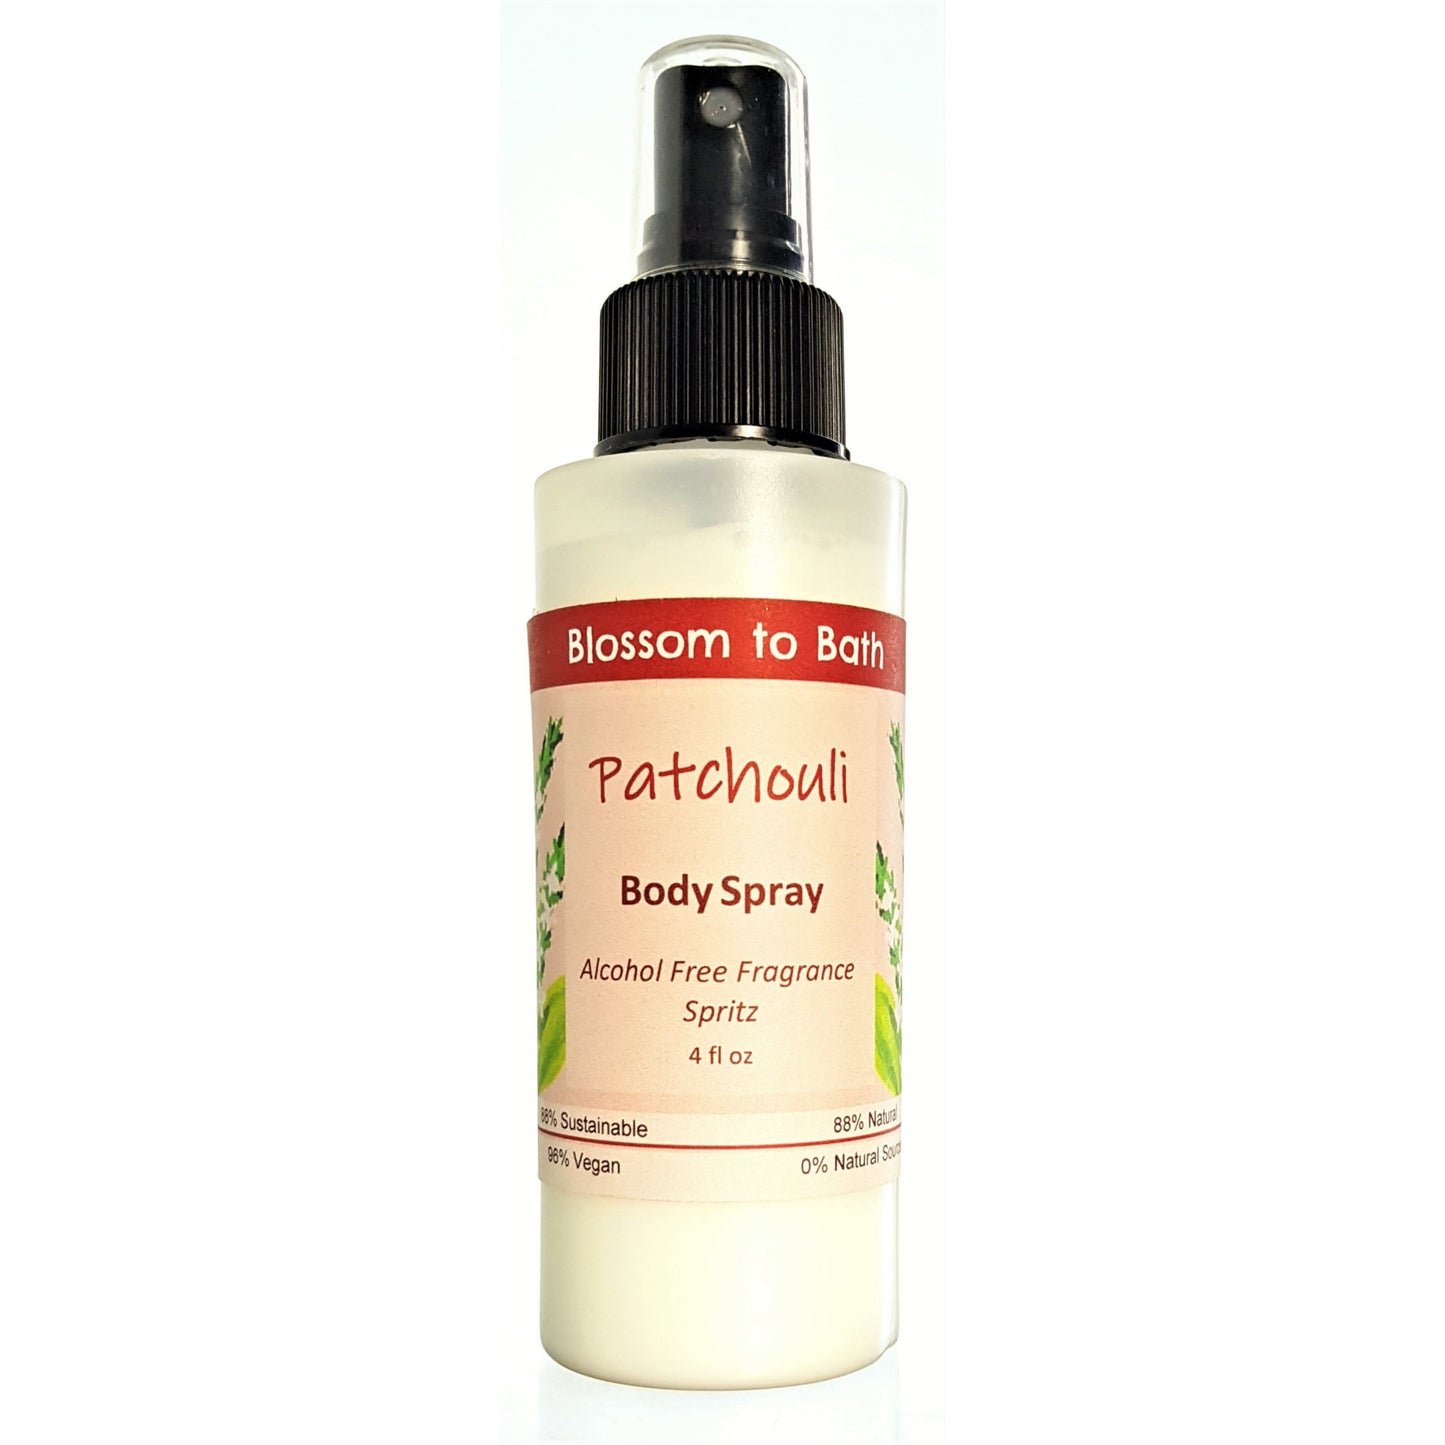 Buy Blossom to Bath Patchouli Body Spray from Flowersong Soap Studio.  Natural luxurious freshening of skin, linens, or air  The pure earthy, woody, spicy scent of straight Patchouli.